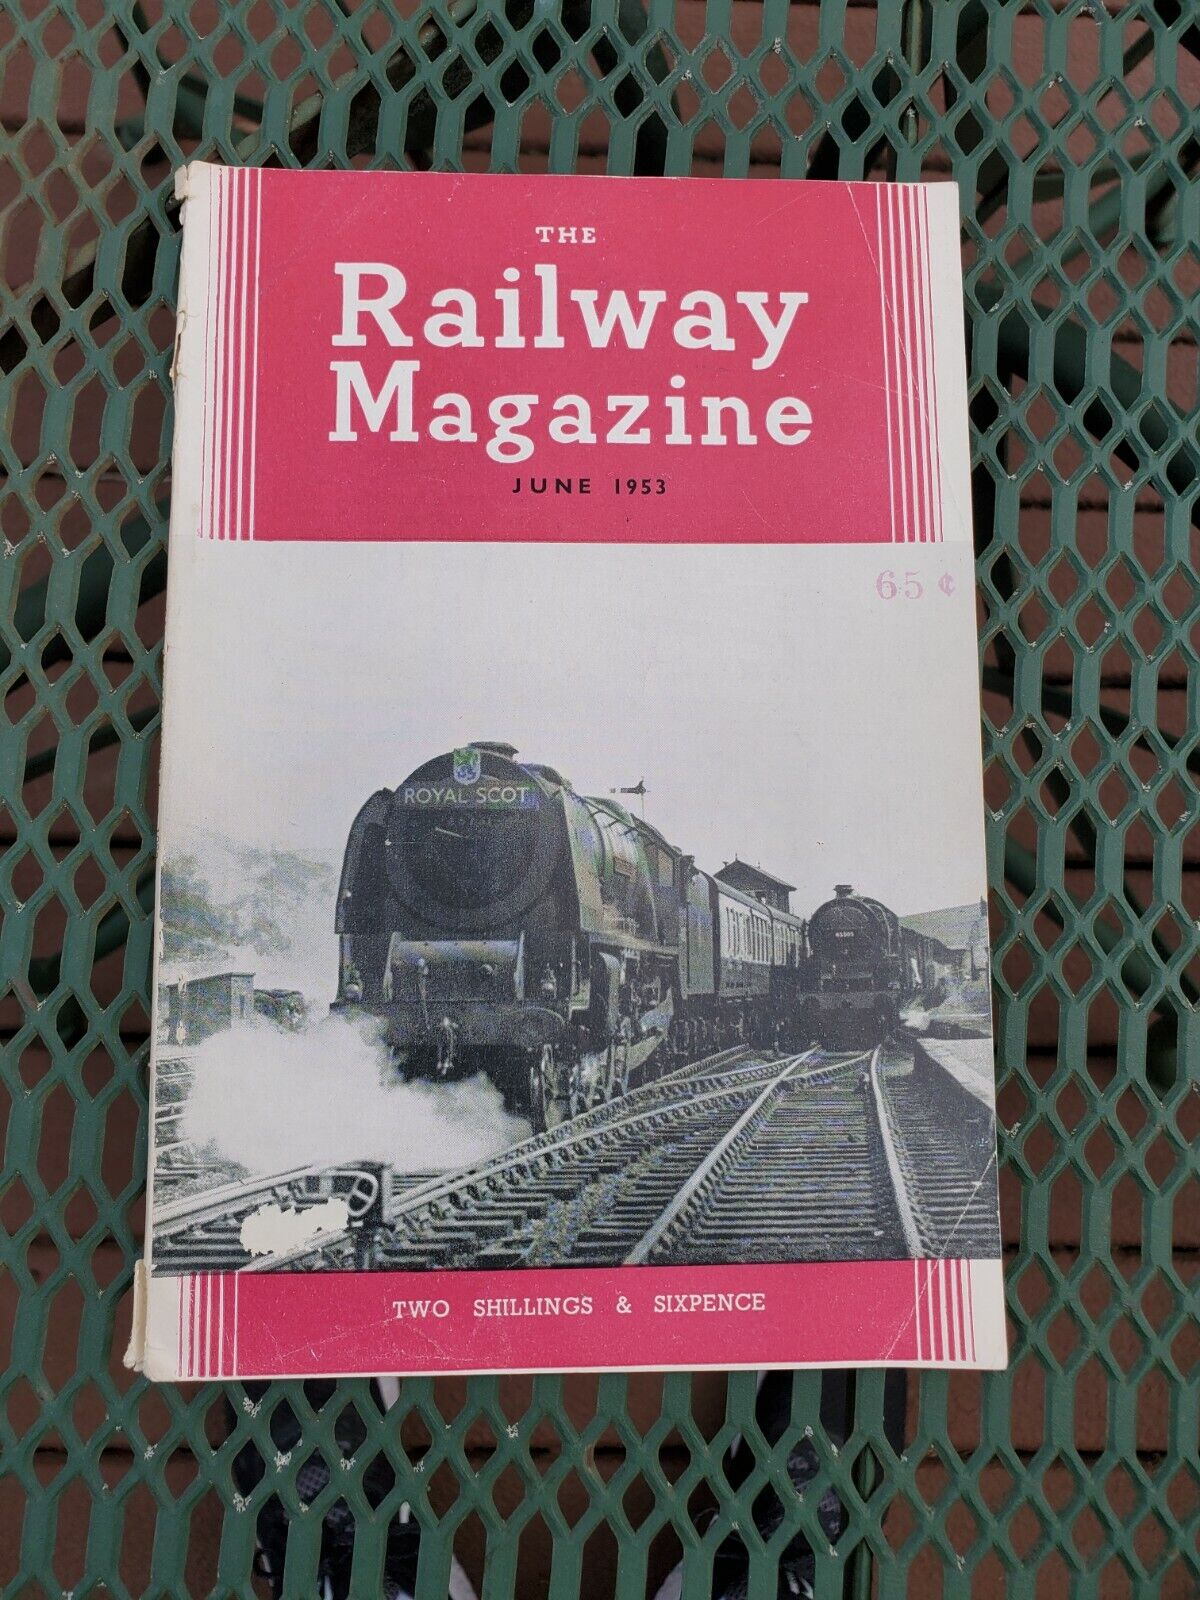 June 1953 Issue - The Railway Magazine - Printed in London